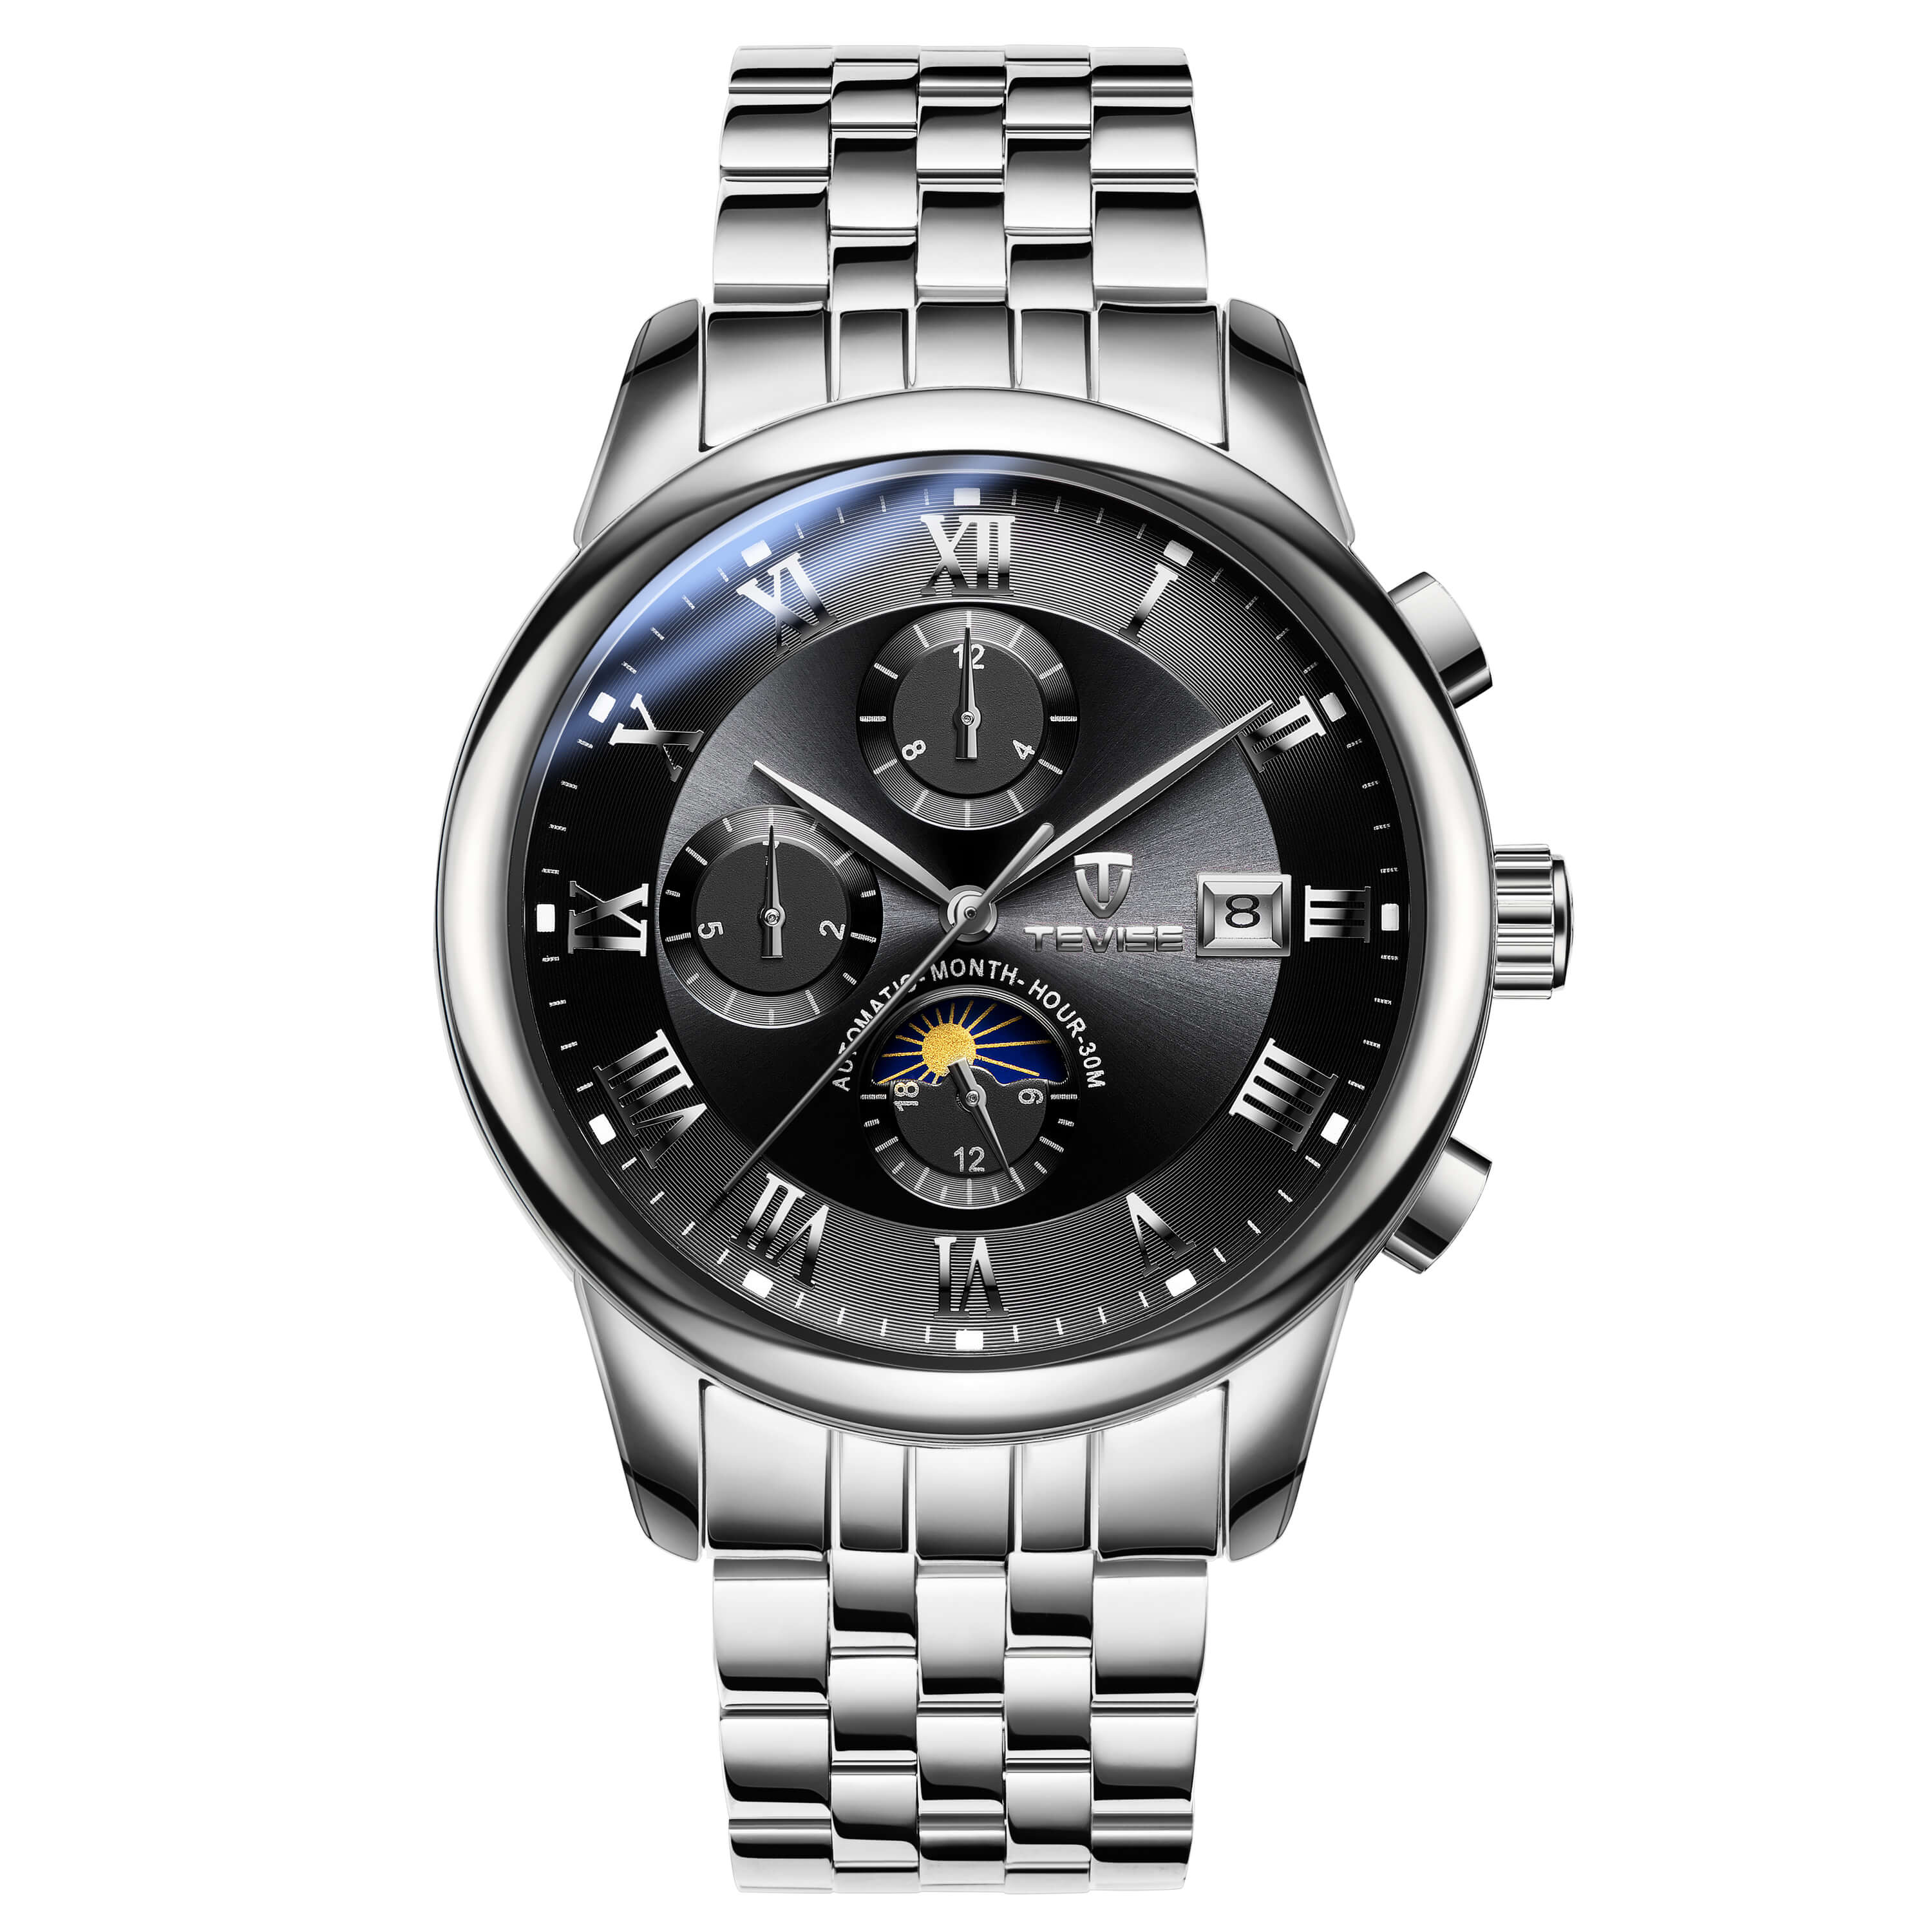 TEVISE 9008 Men's Automatic Mechanical Men's Watch Moon Phase Stainless Steel - Silver